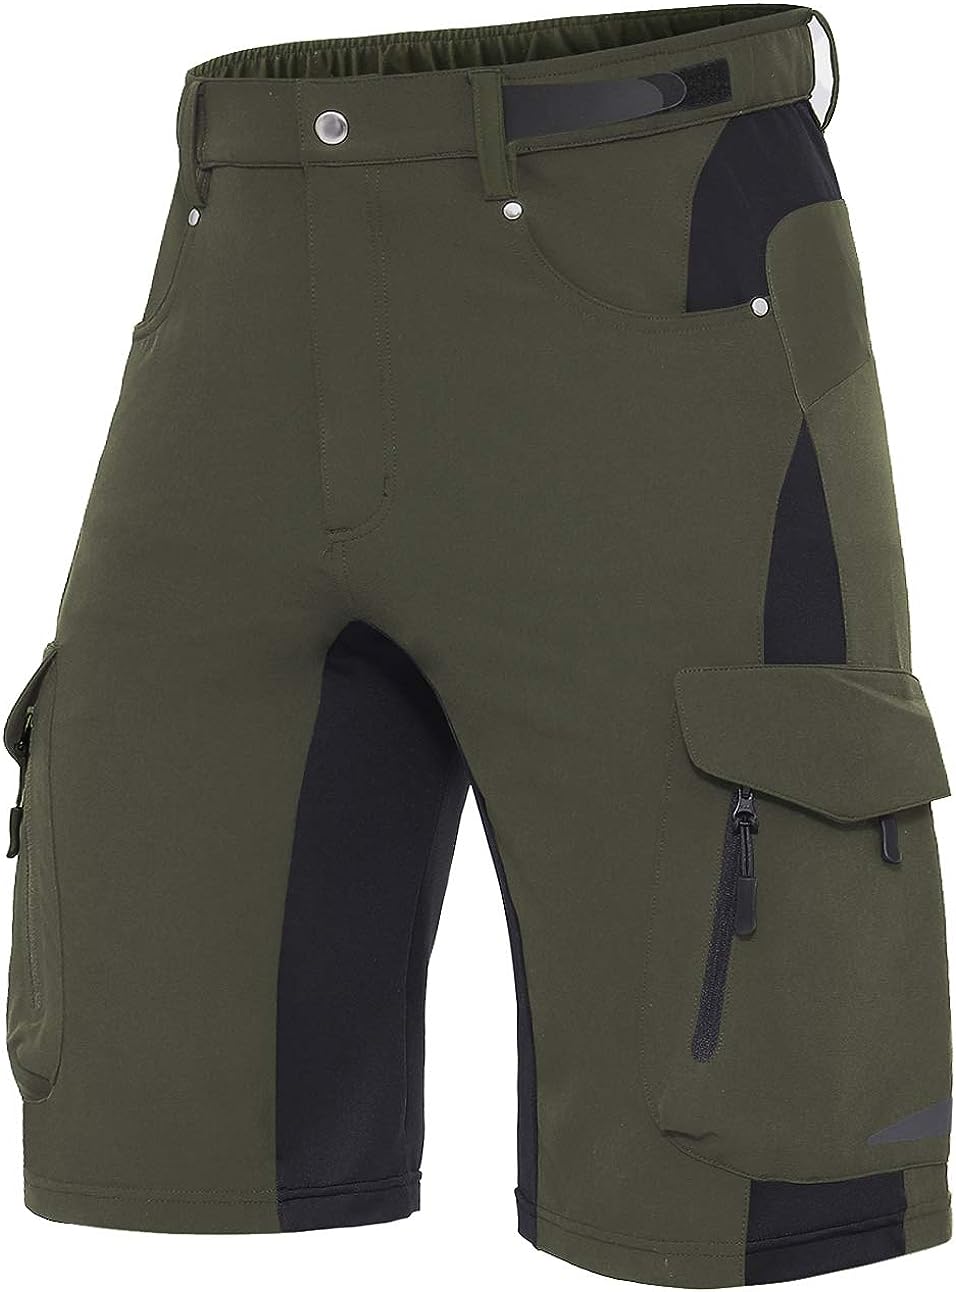 Men's Outdoor Quick Dry Lightweight Stretchy Shorts for Hiking #Color_army green